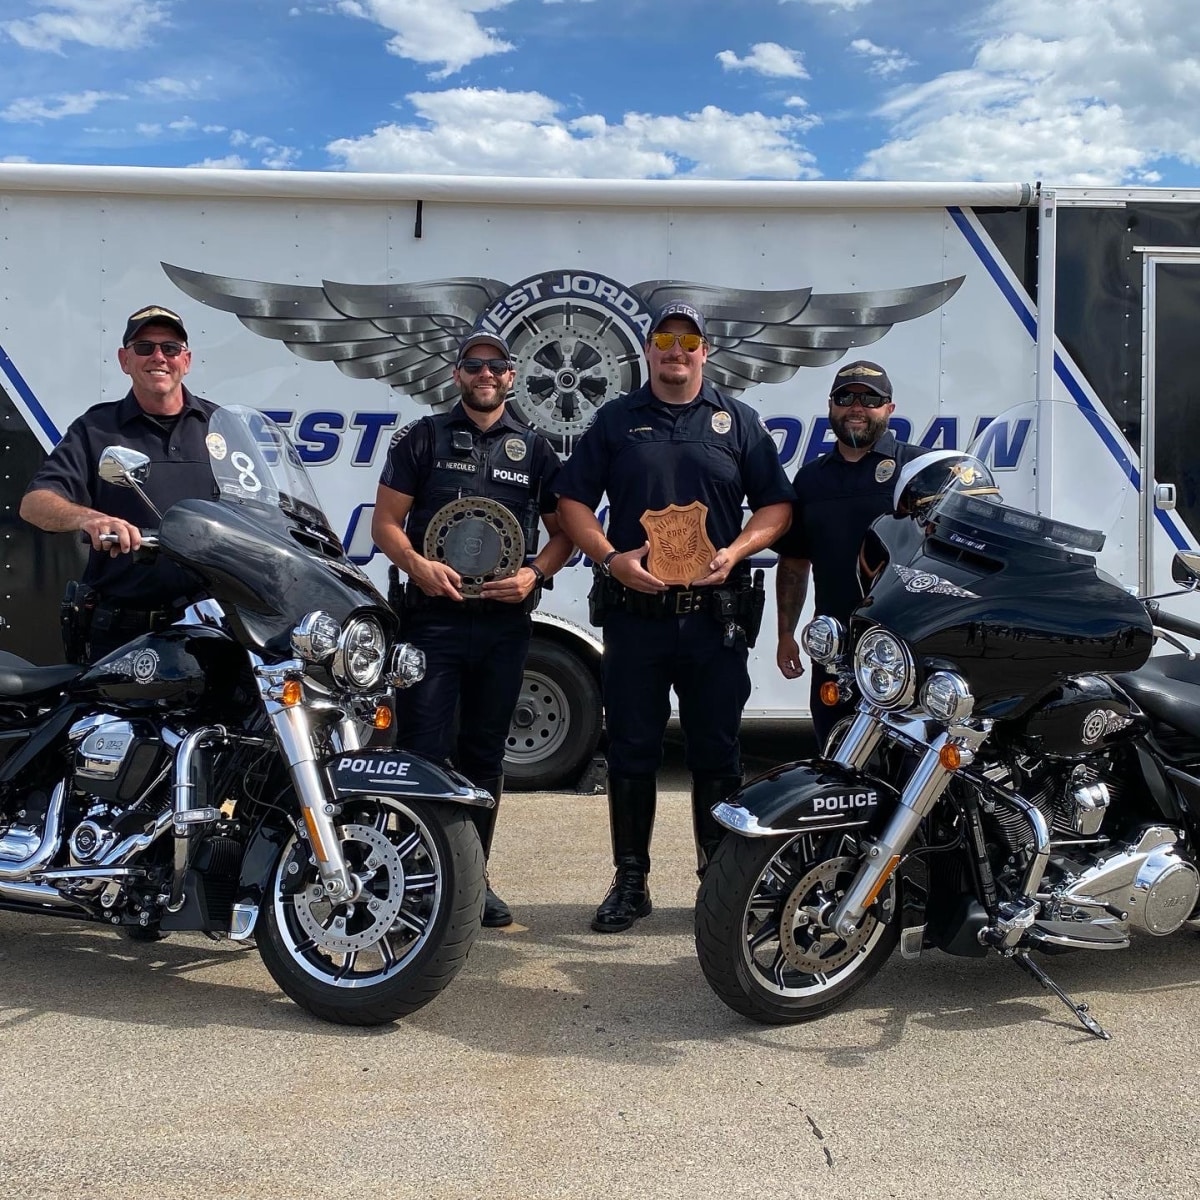 WJ Officers Take Home Awards in 1st Annual Wasatch Front Police Motor Rodeo